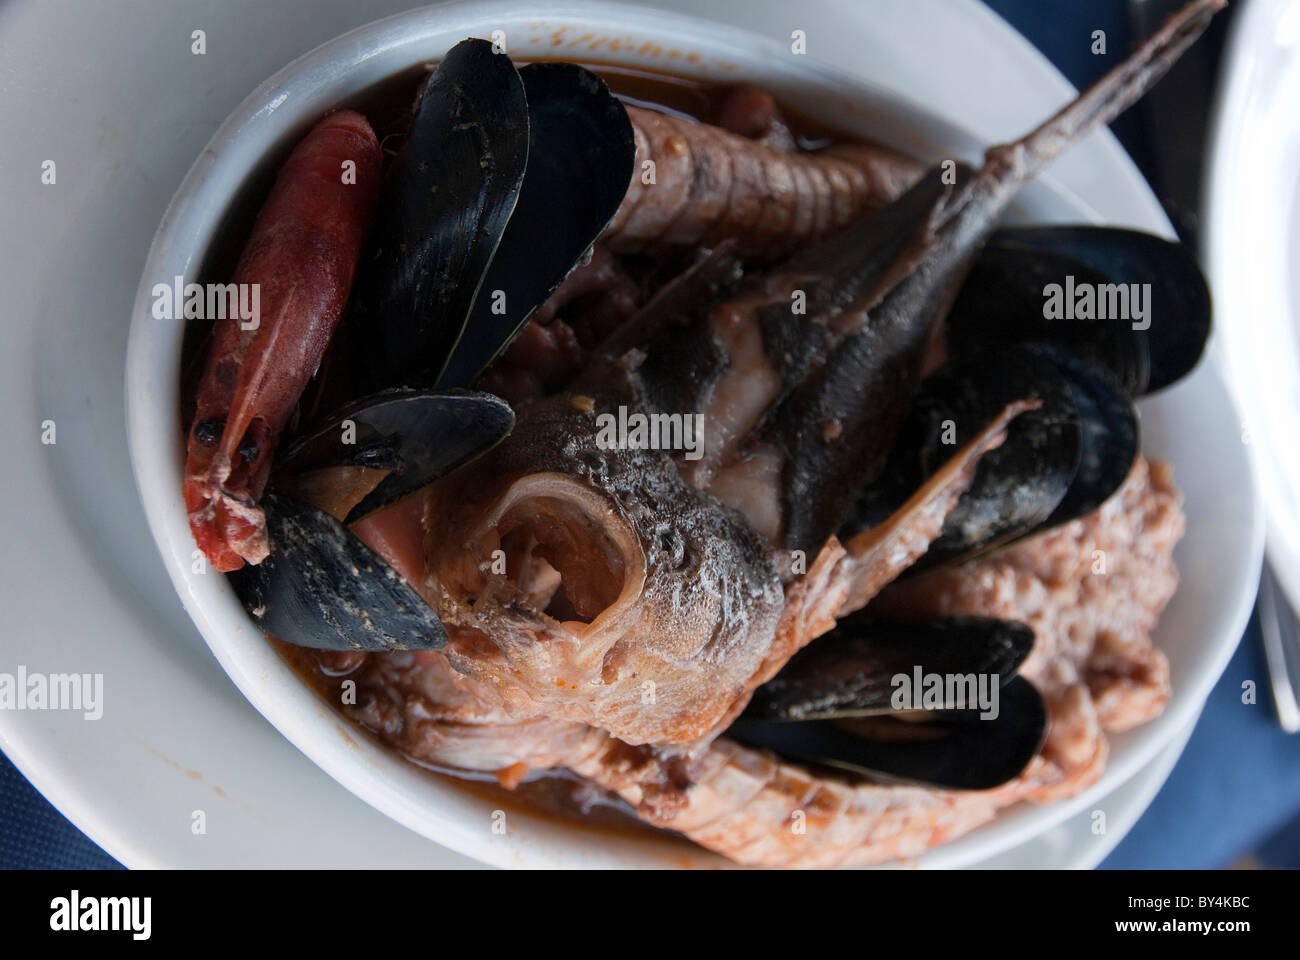 Livorno fish stew known as “Cacciucco” containing five different kinds of fish served in a soup dish Stock Photo